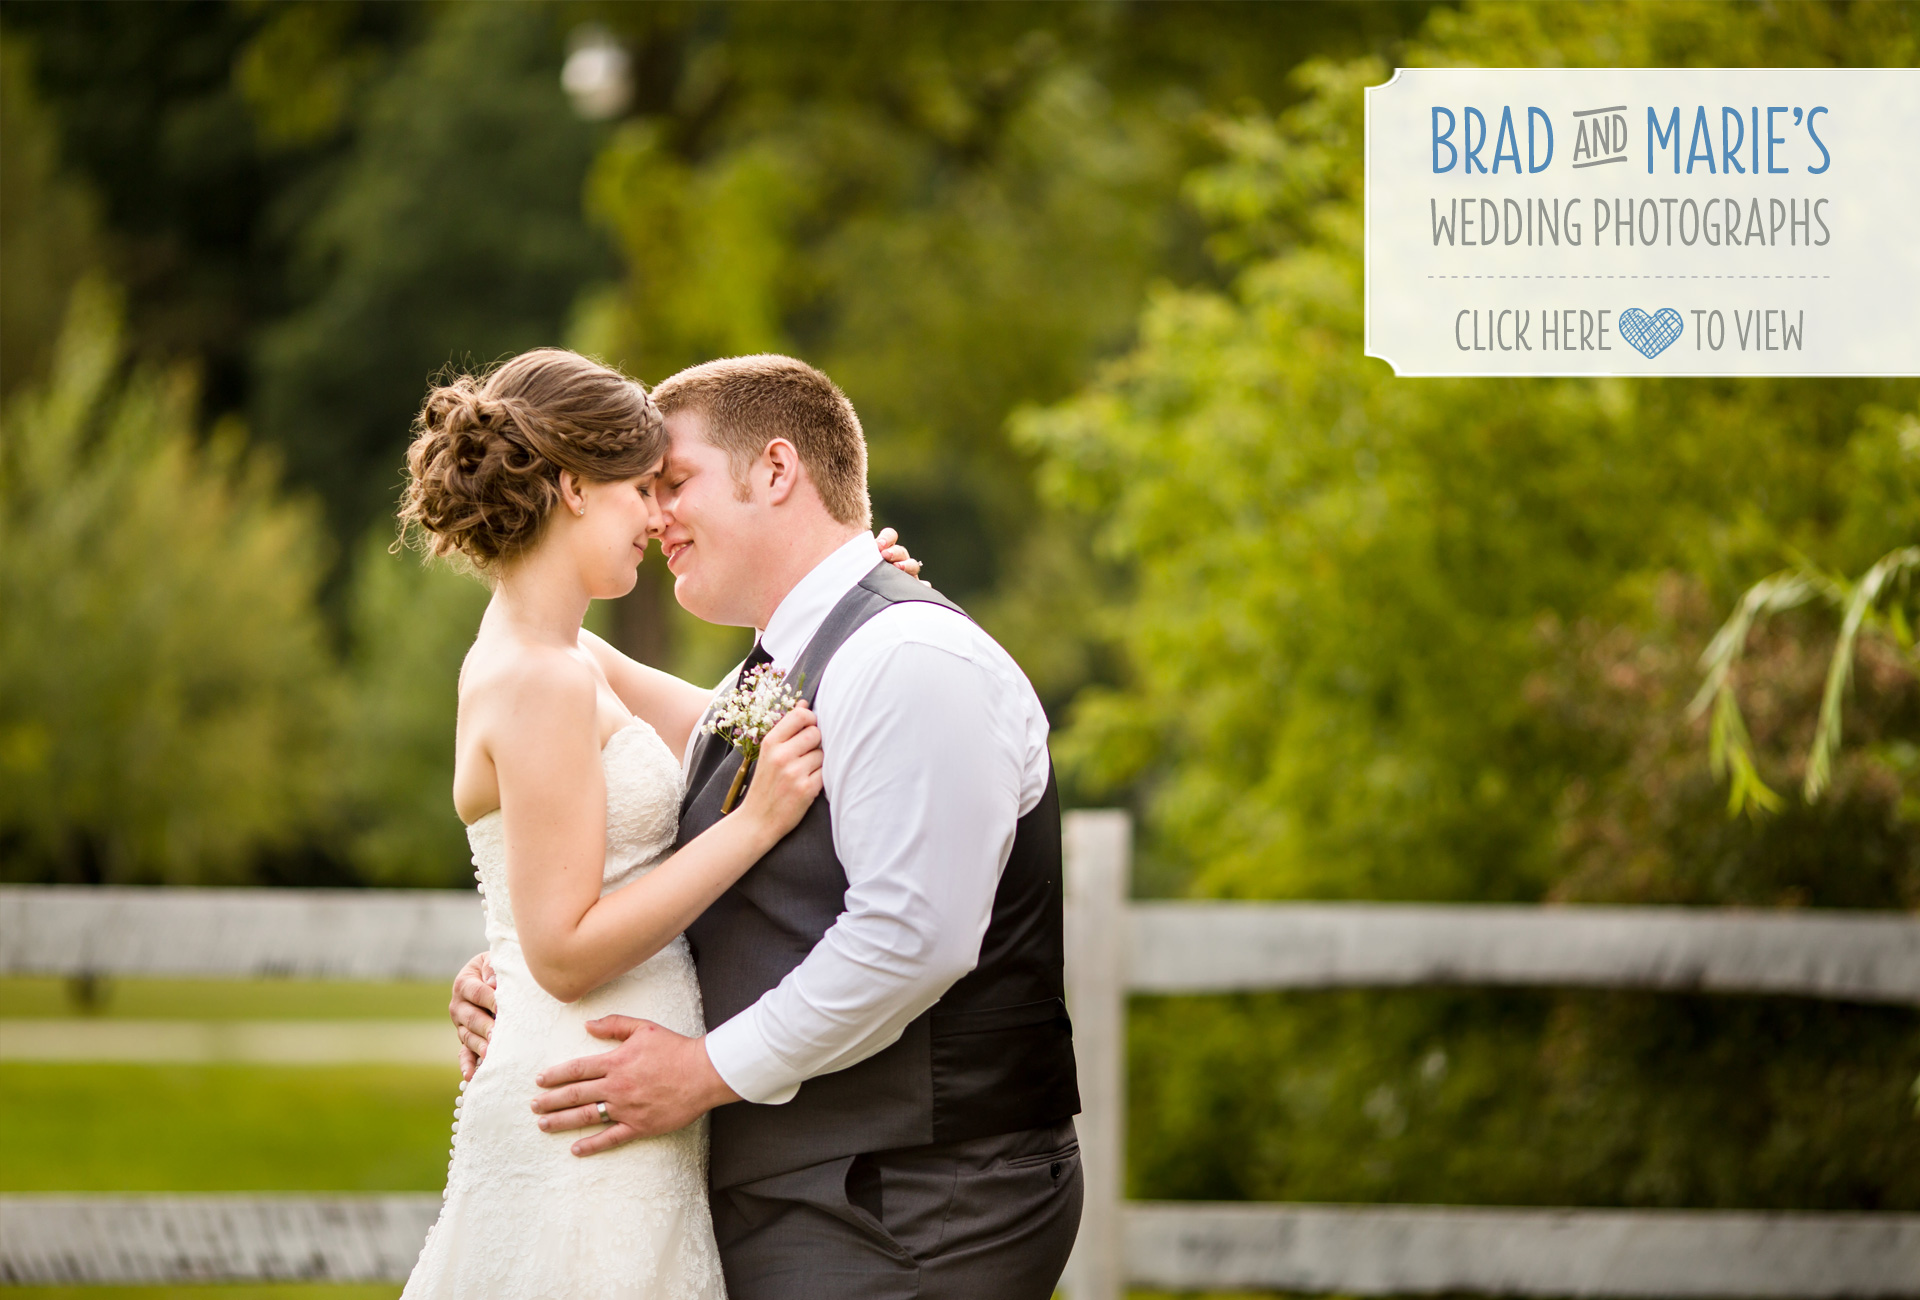 Brad and Marie | Country Wedding at Milestone Barn, Bannister, MI